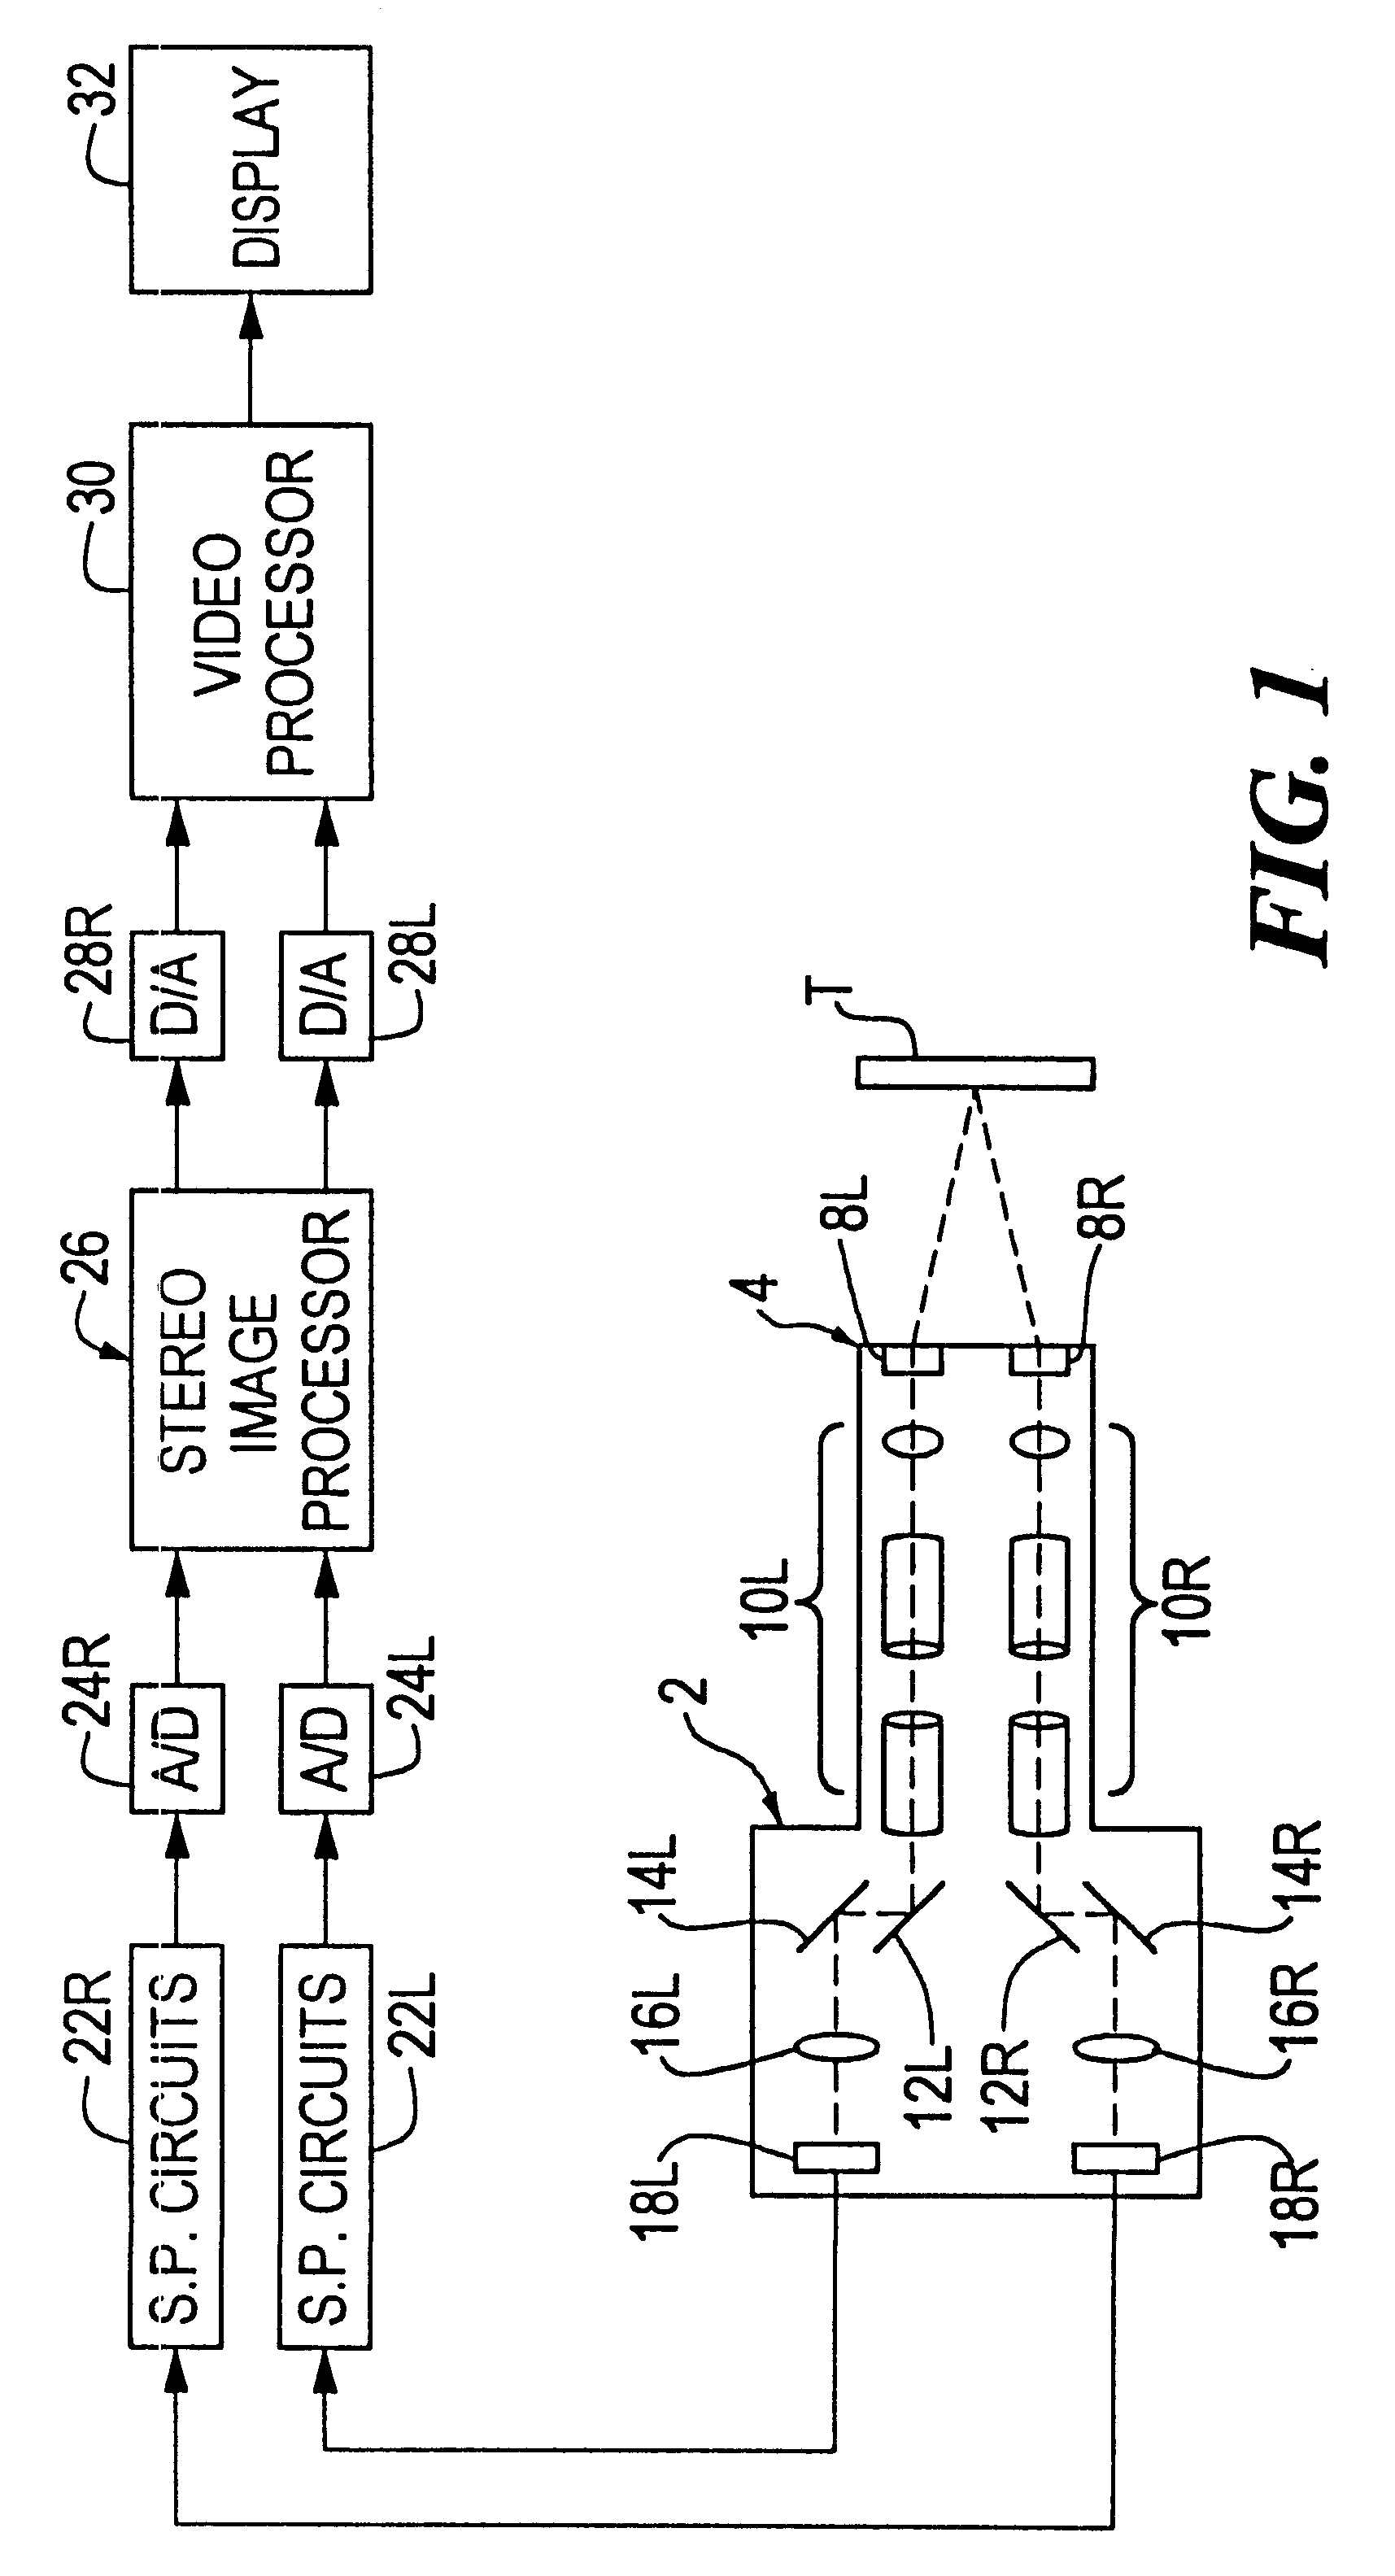 Method and apparatus for aligning stereo images